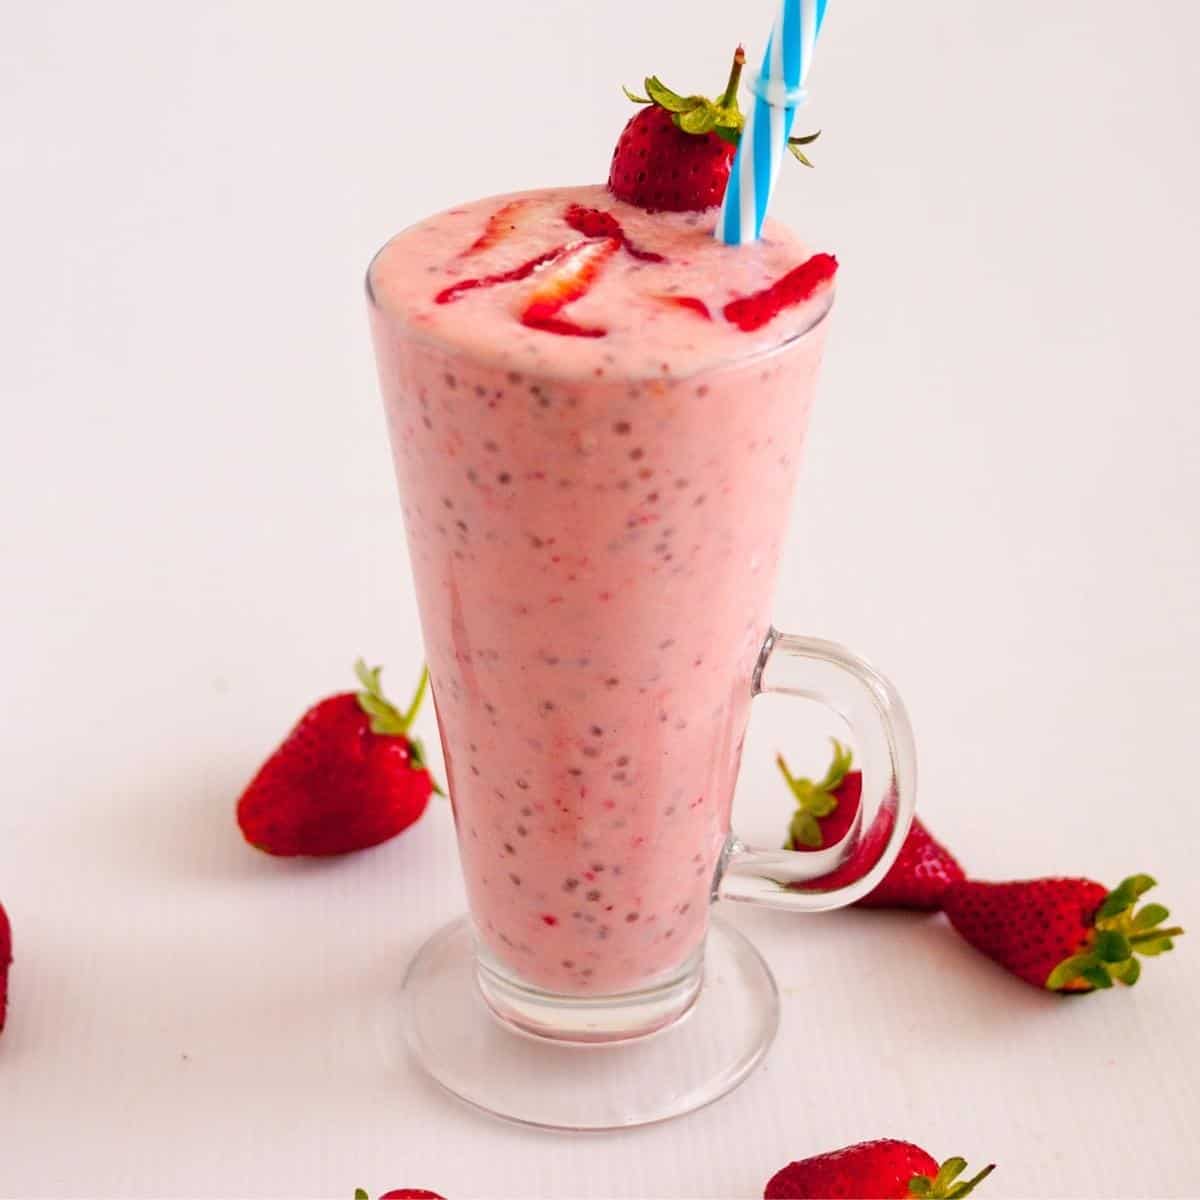 A berry smoothie in a tall glass.